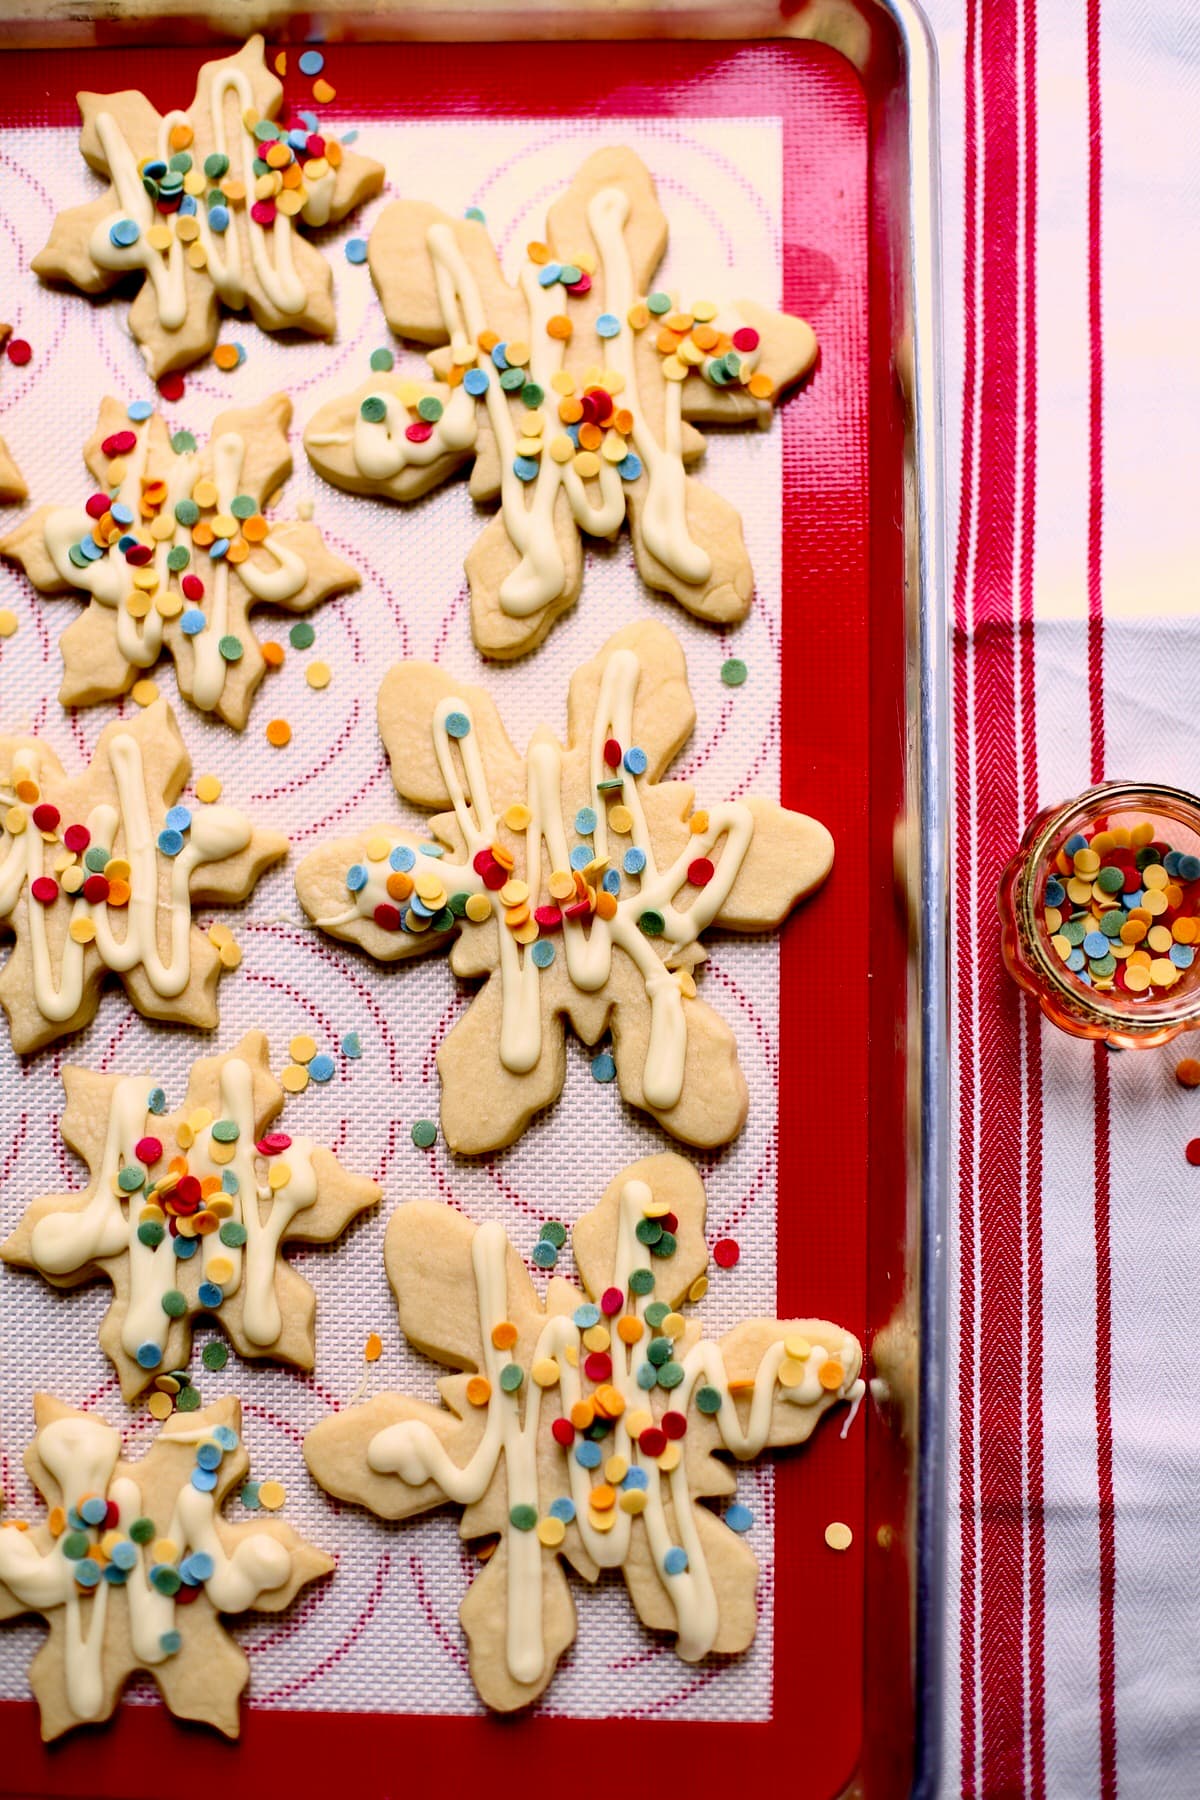 Finished snowflake cookies frosted with sprinkles on a baking sheet